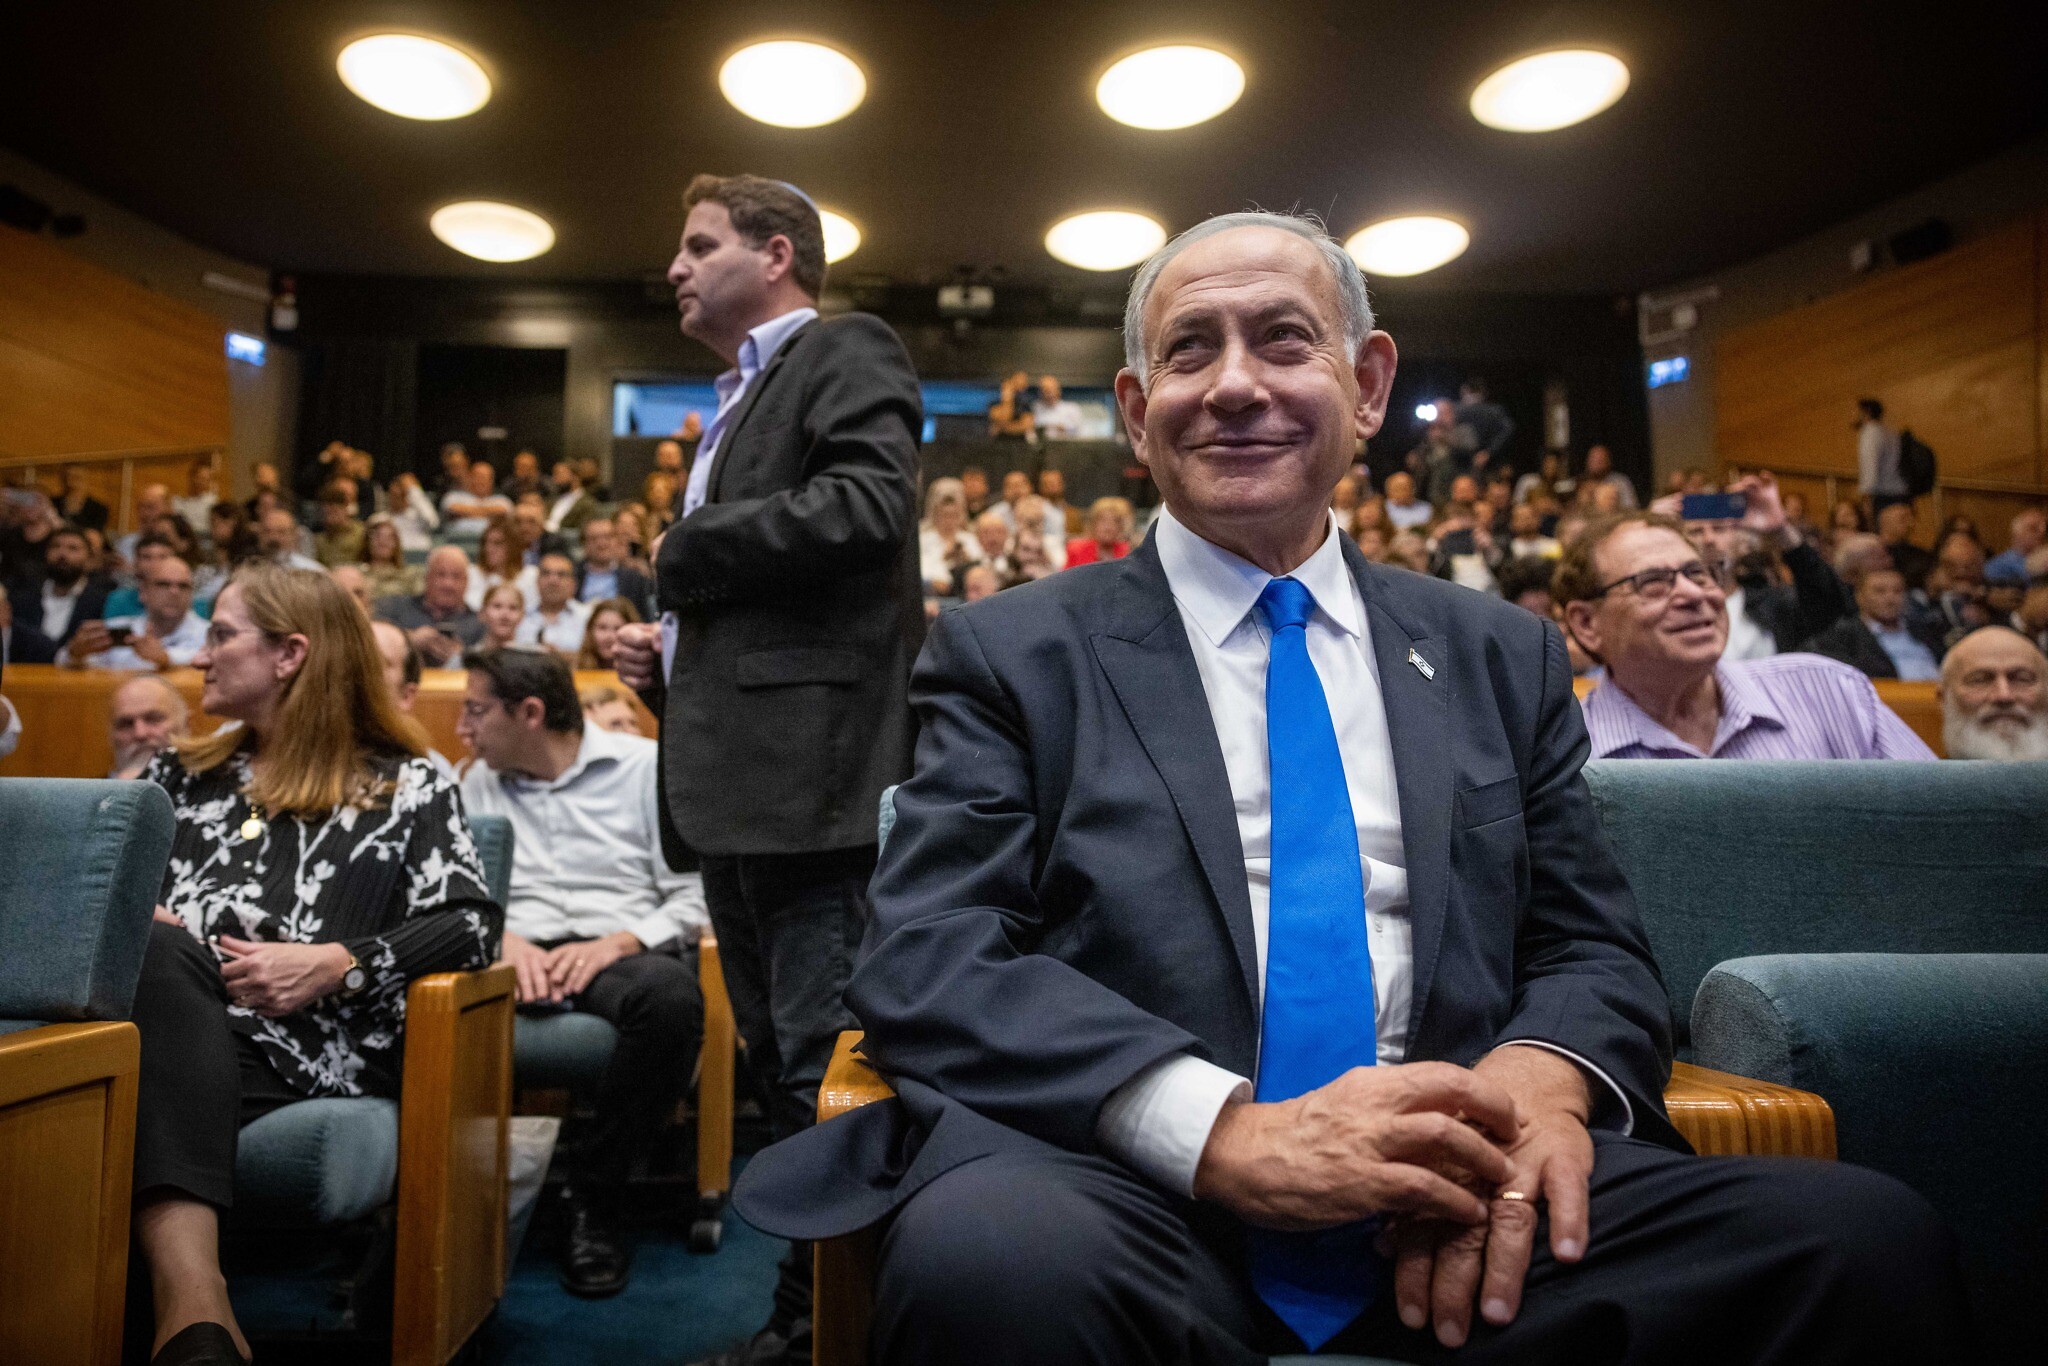 Likud party chairman MK Benjamin Netanyahu at an event for the launch of his autobiography in Jerusalem on November 14, 2022, a day after he was tasked by the president with forming Israel's next government. (Yonatan Sindel/Flash90)